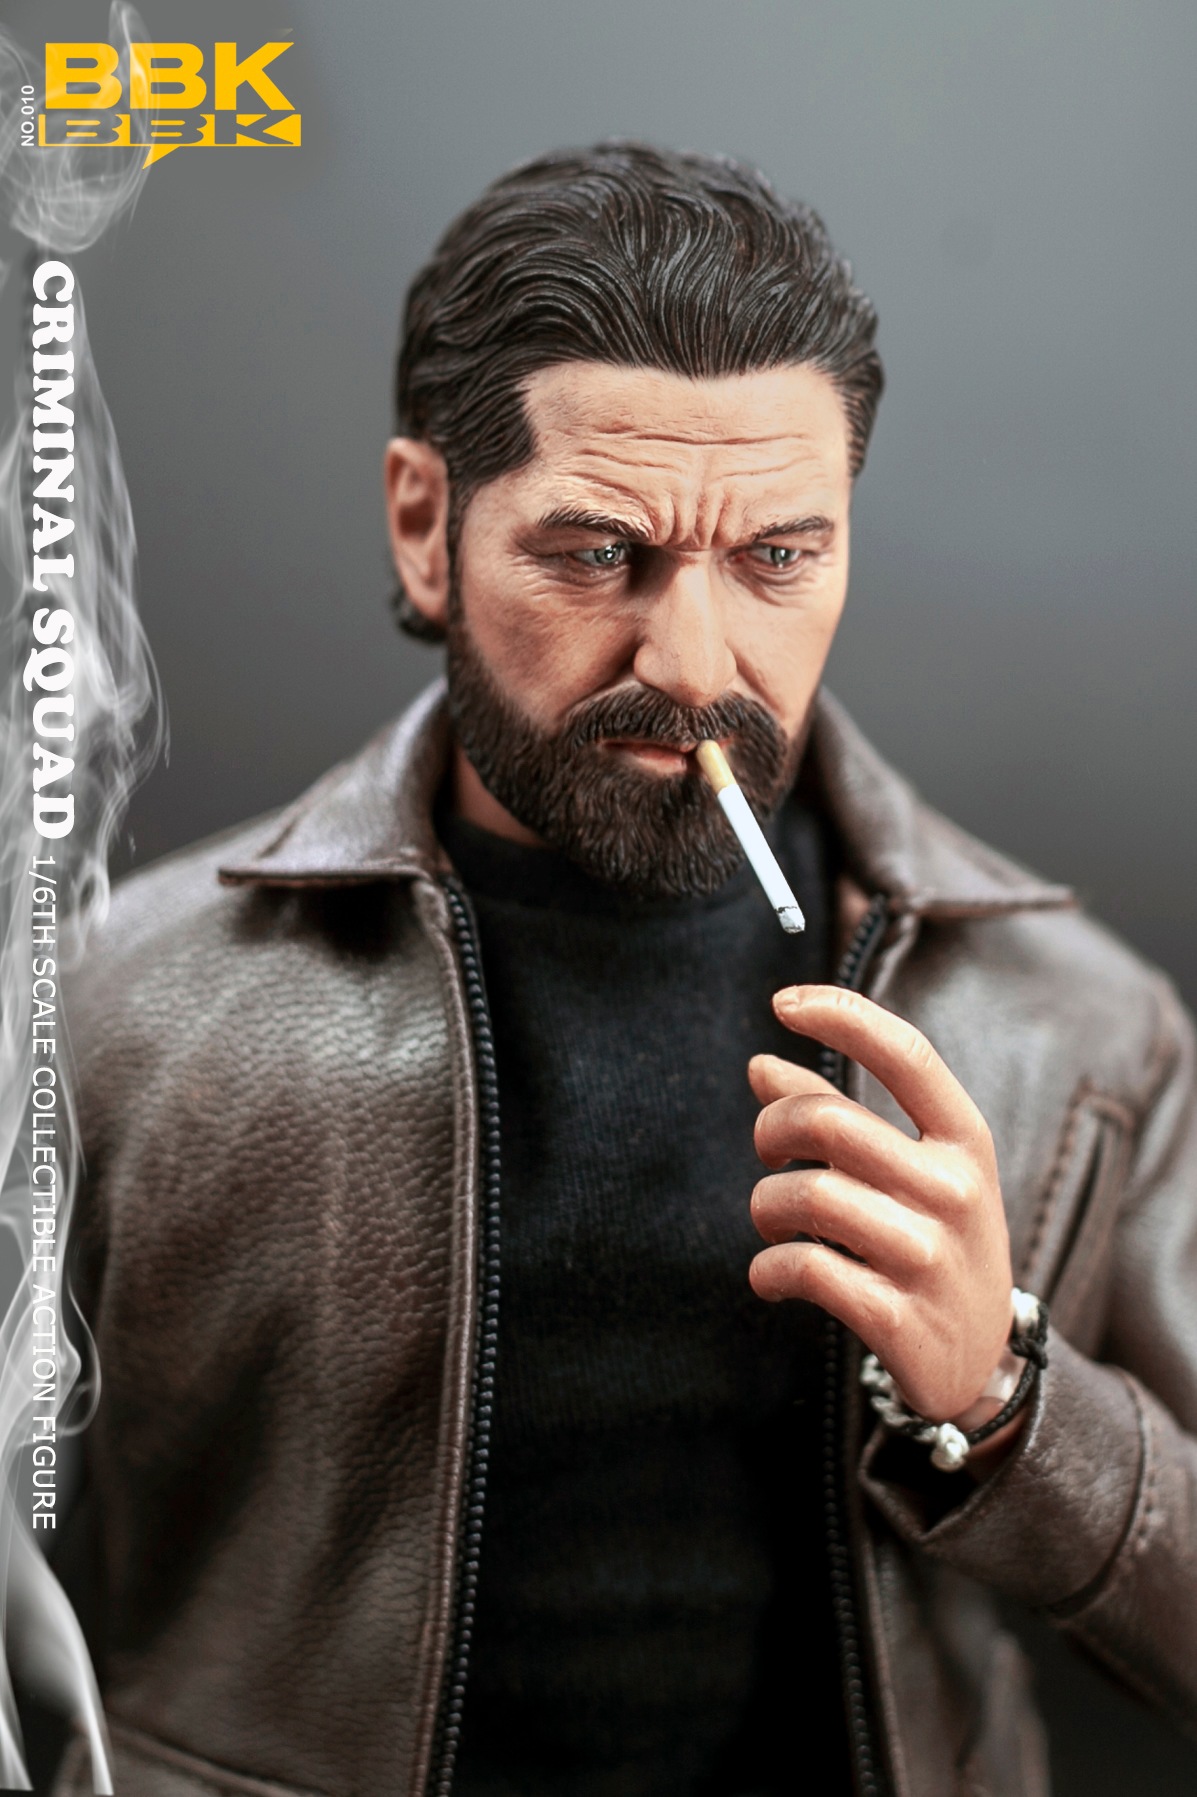 BBK-010 BBK 1/6 scale Hard Boiled Action Figure - ToysFanatic Collections